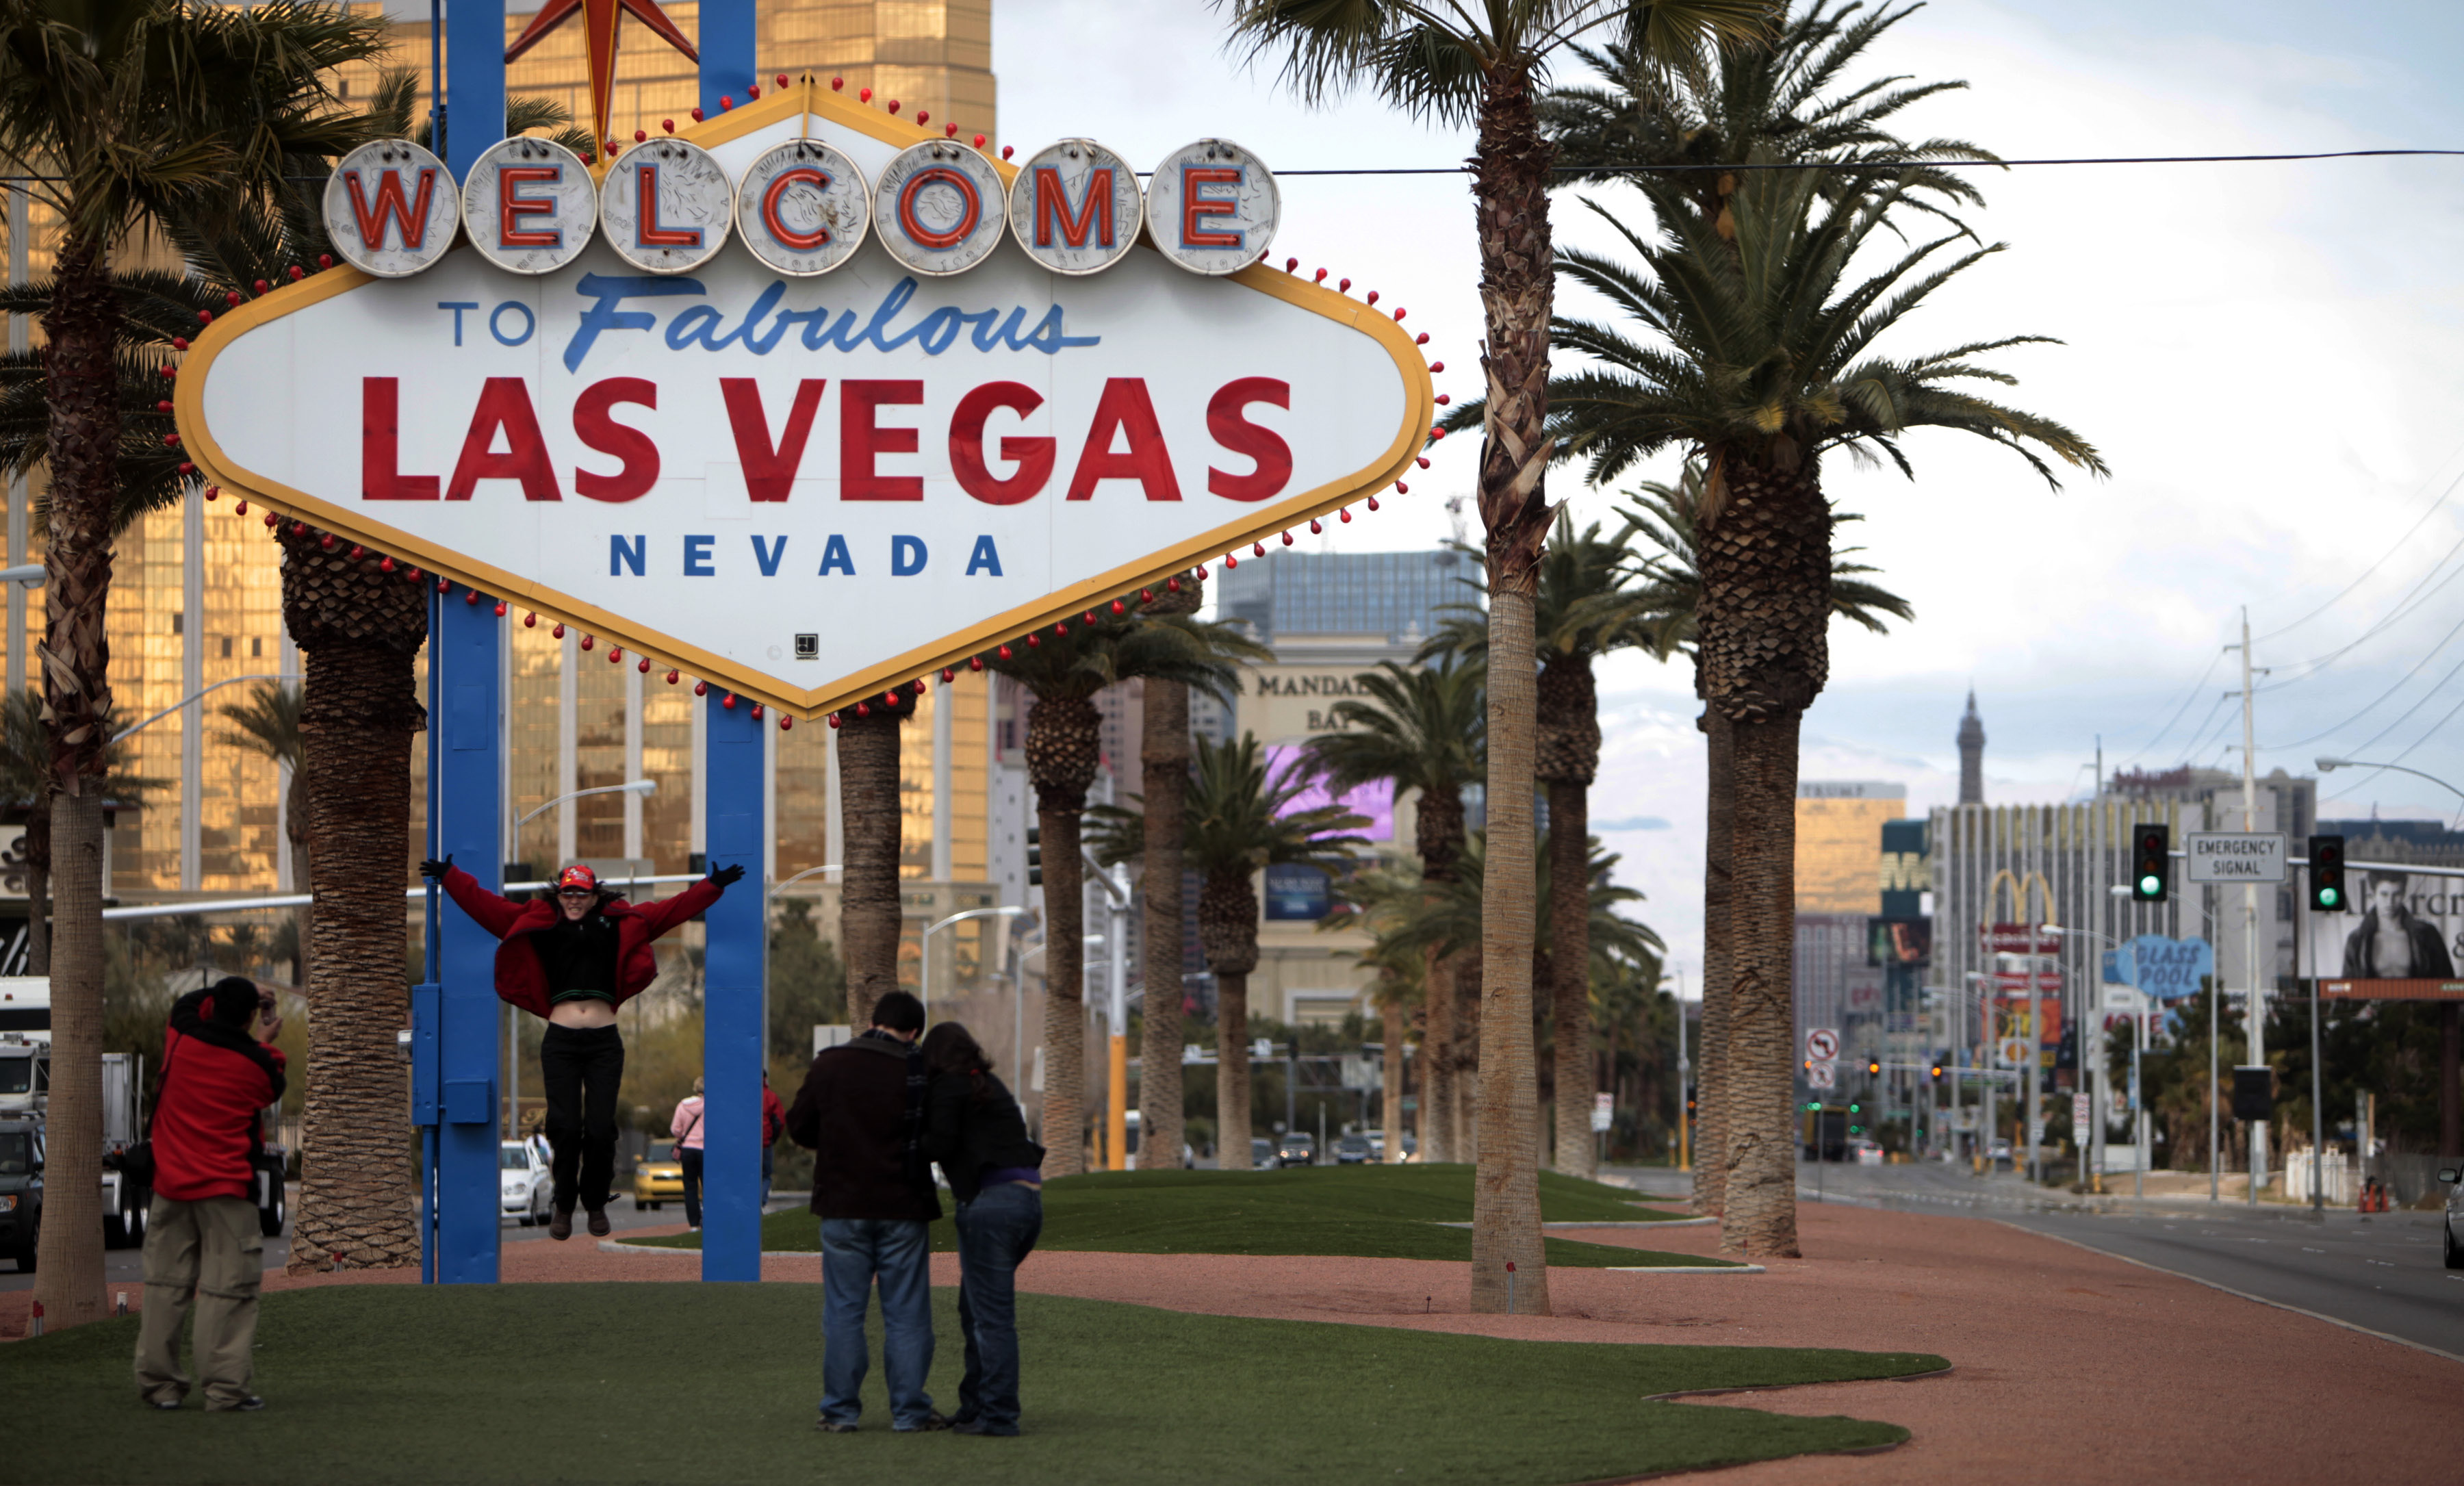 Tourists take pictures on Feb 12, 2009 in front of the "Welcome to Fabulous Las Vegas" neon sign in Las Vegas. (Jae C. Hong—AP)